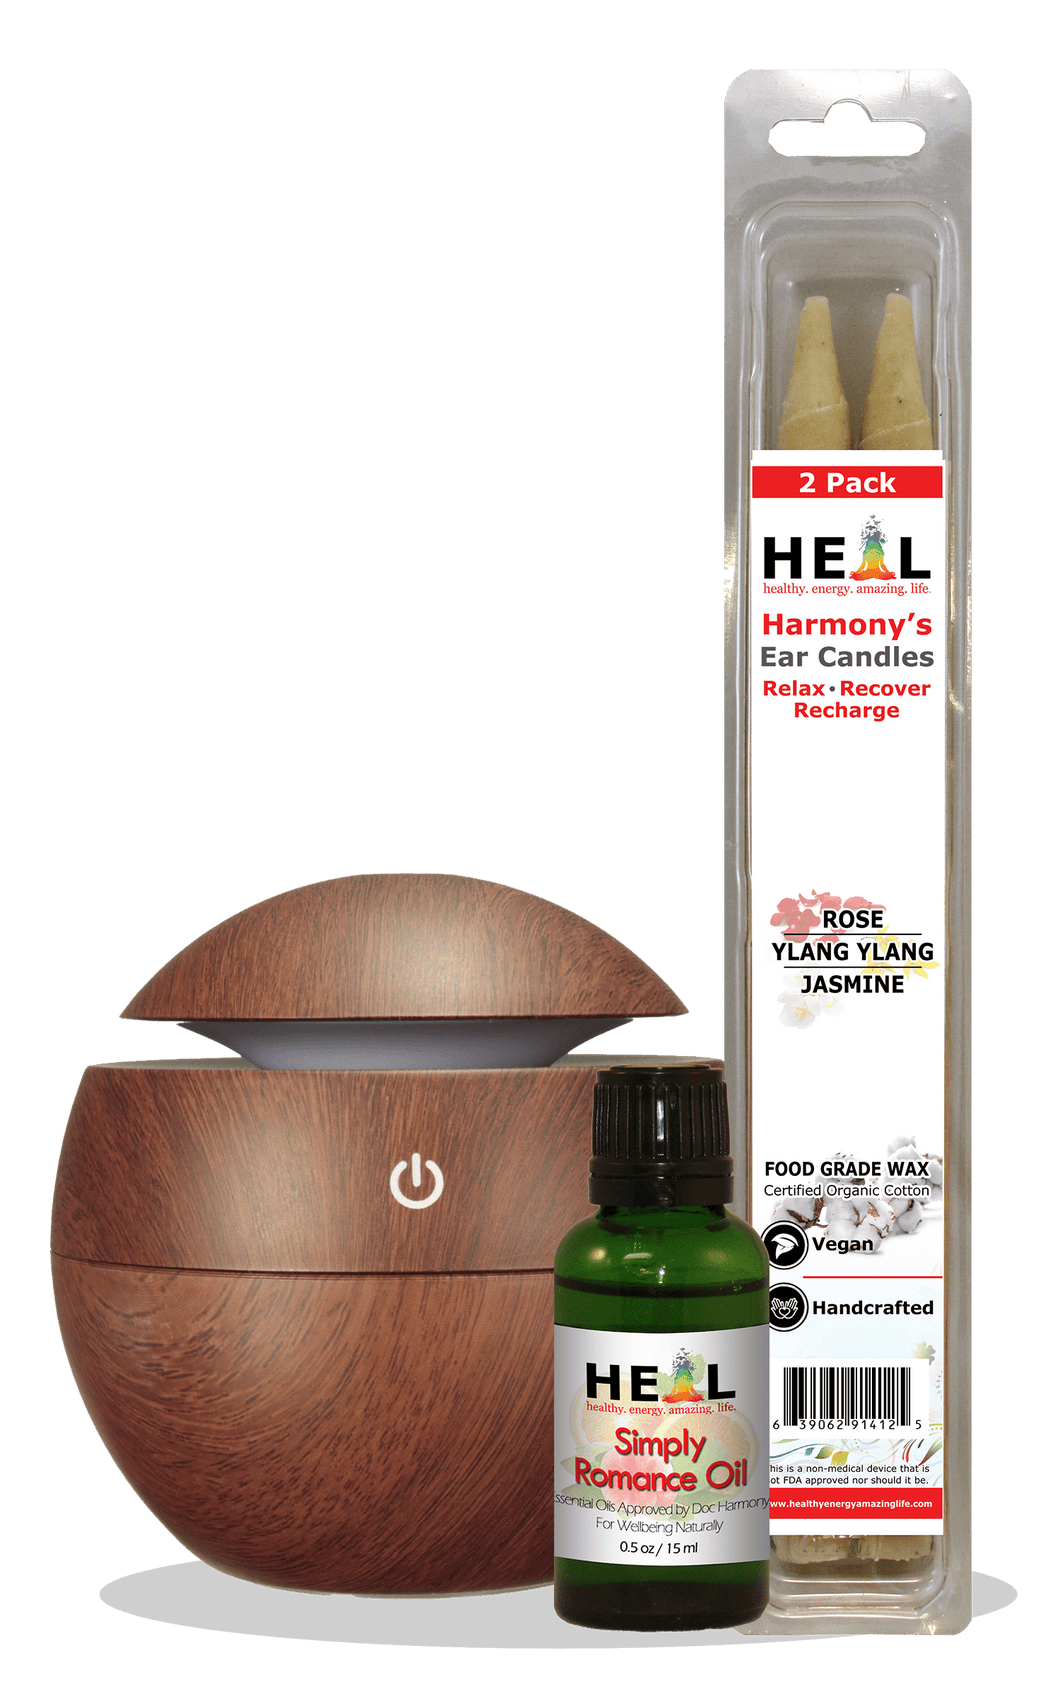 happyenergyamazinglife Natural Health Products A Touch of Romance H.E.A.L.’s Aroma Diffuser Gift Kit